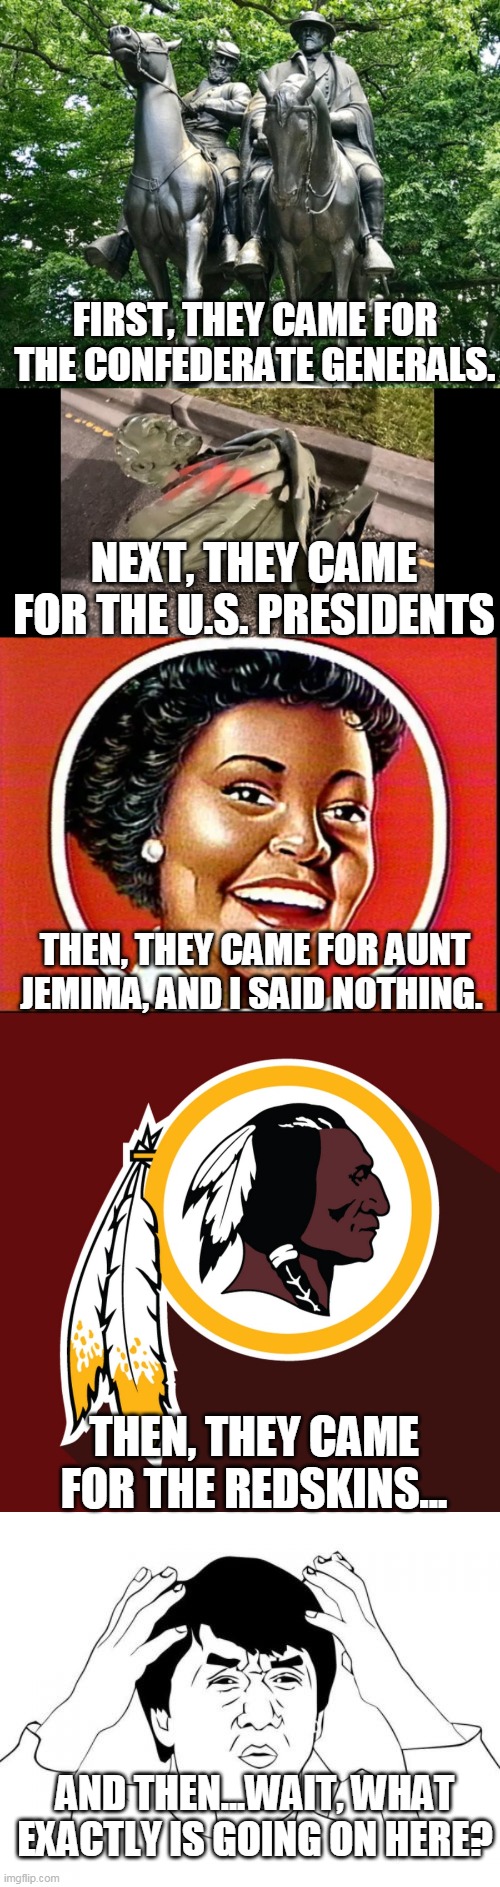 Cancel Culture | FIRST, THEY CAME FOR THE CONFEDERATE GENERALS. NEXT, THEY CAME FOR THE U.S. PRESIDENTS; THEN, THEY CAME FOR AUNT JEMIMA, AND I SAID NOTHING. THEN, THEY CAME FOR THE REDSKINS... AND THEN...WAIT, WHAT EXACTLY IS GOING ON HERE? | image tagged in redskins,aunt jemima,confederate generals,cancel culture,sjw warriors,cultural marxism | made w/ Imgflip meme maker